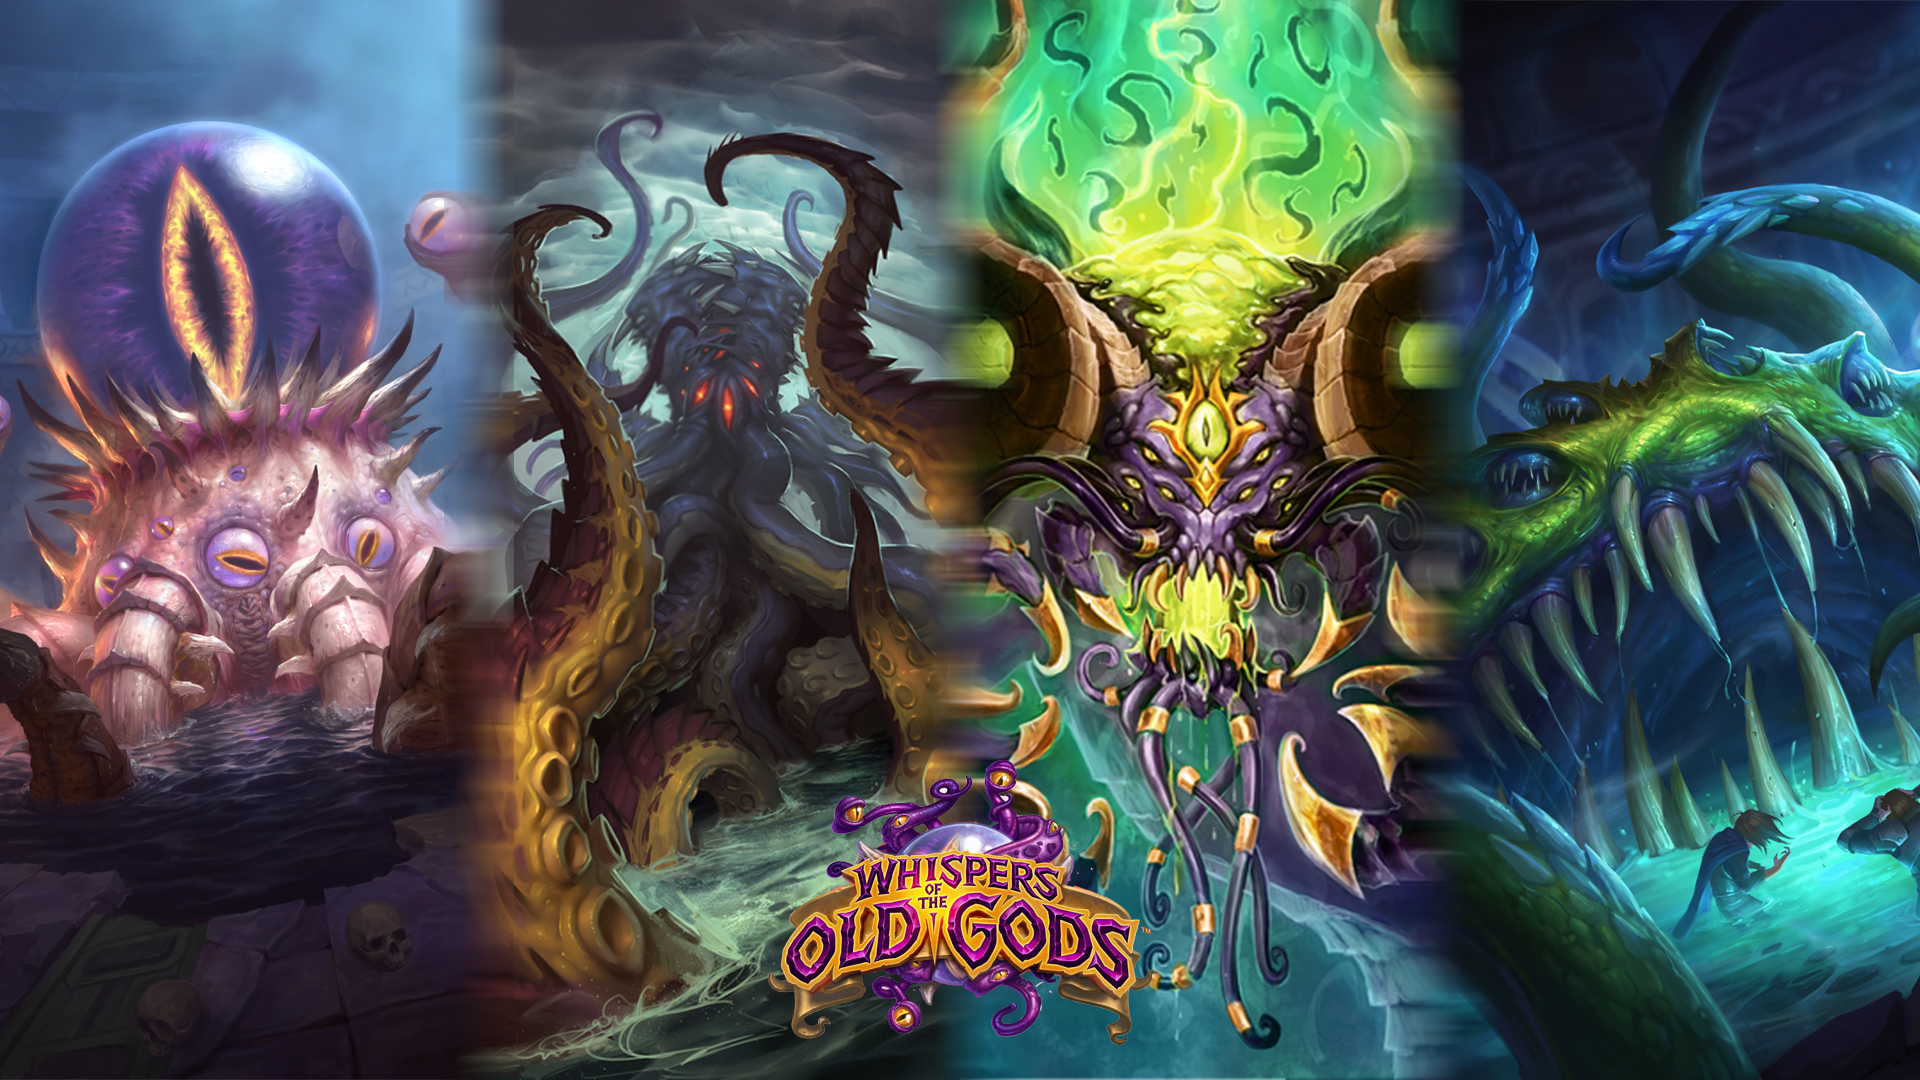 Wallpaper, whispers of the old gods, Hearthstone Heroes of Warcraft, C Thun, Yogg Saron 1920x1080